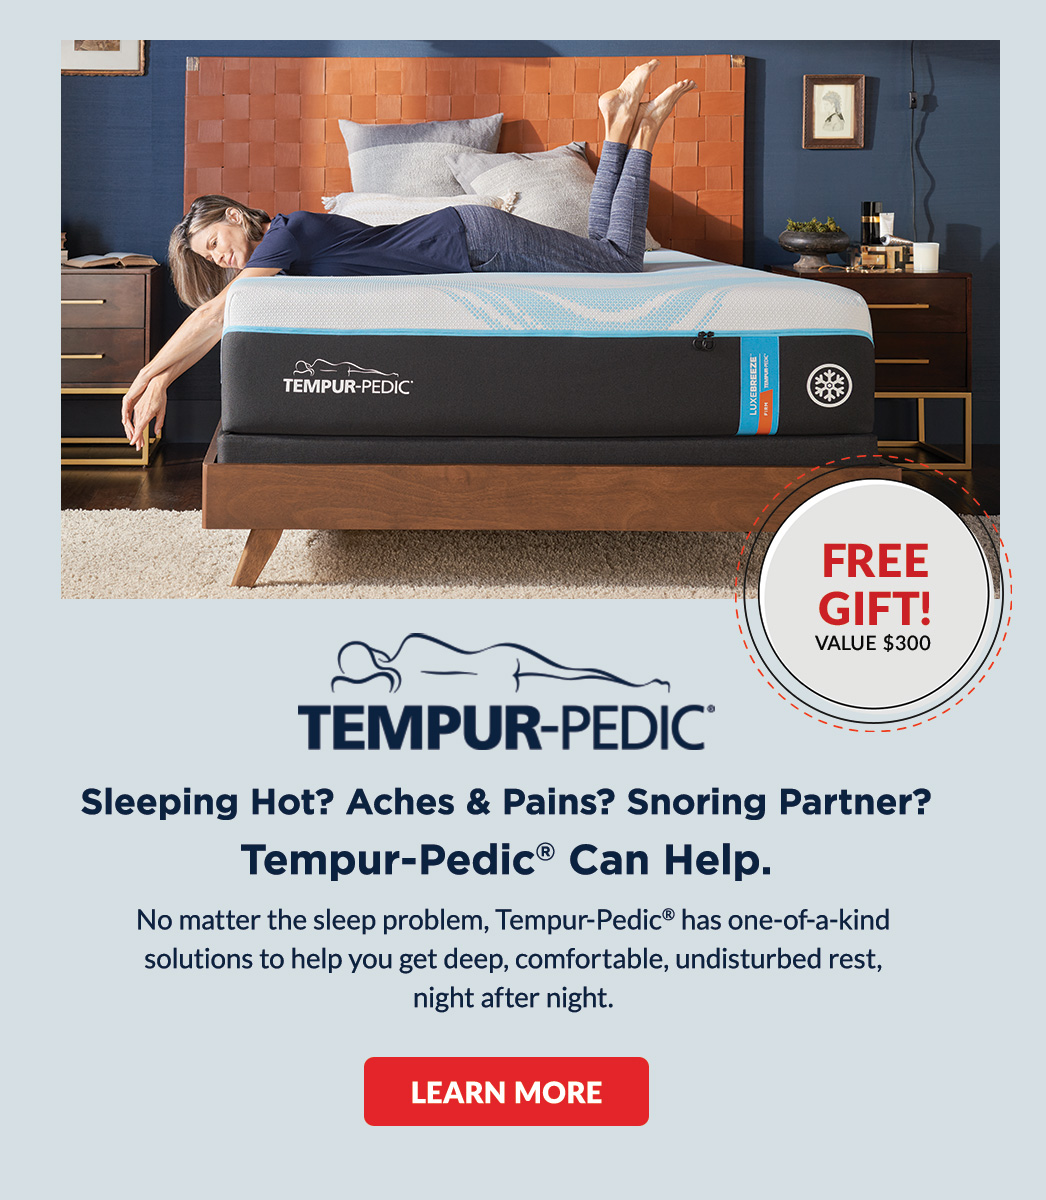 Learn more about Tempur-Pedic